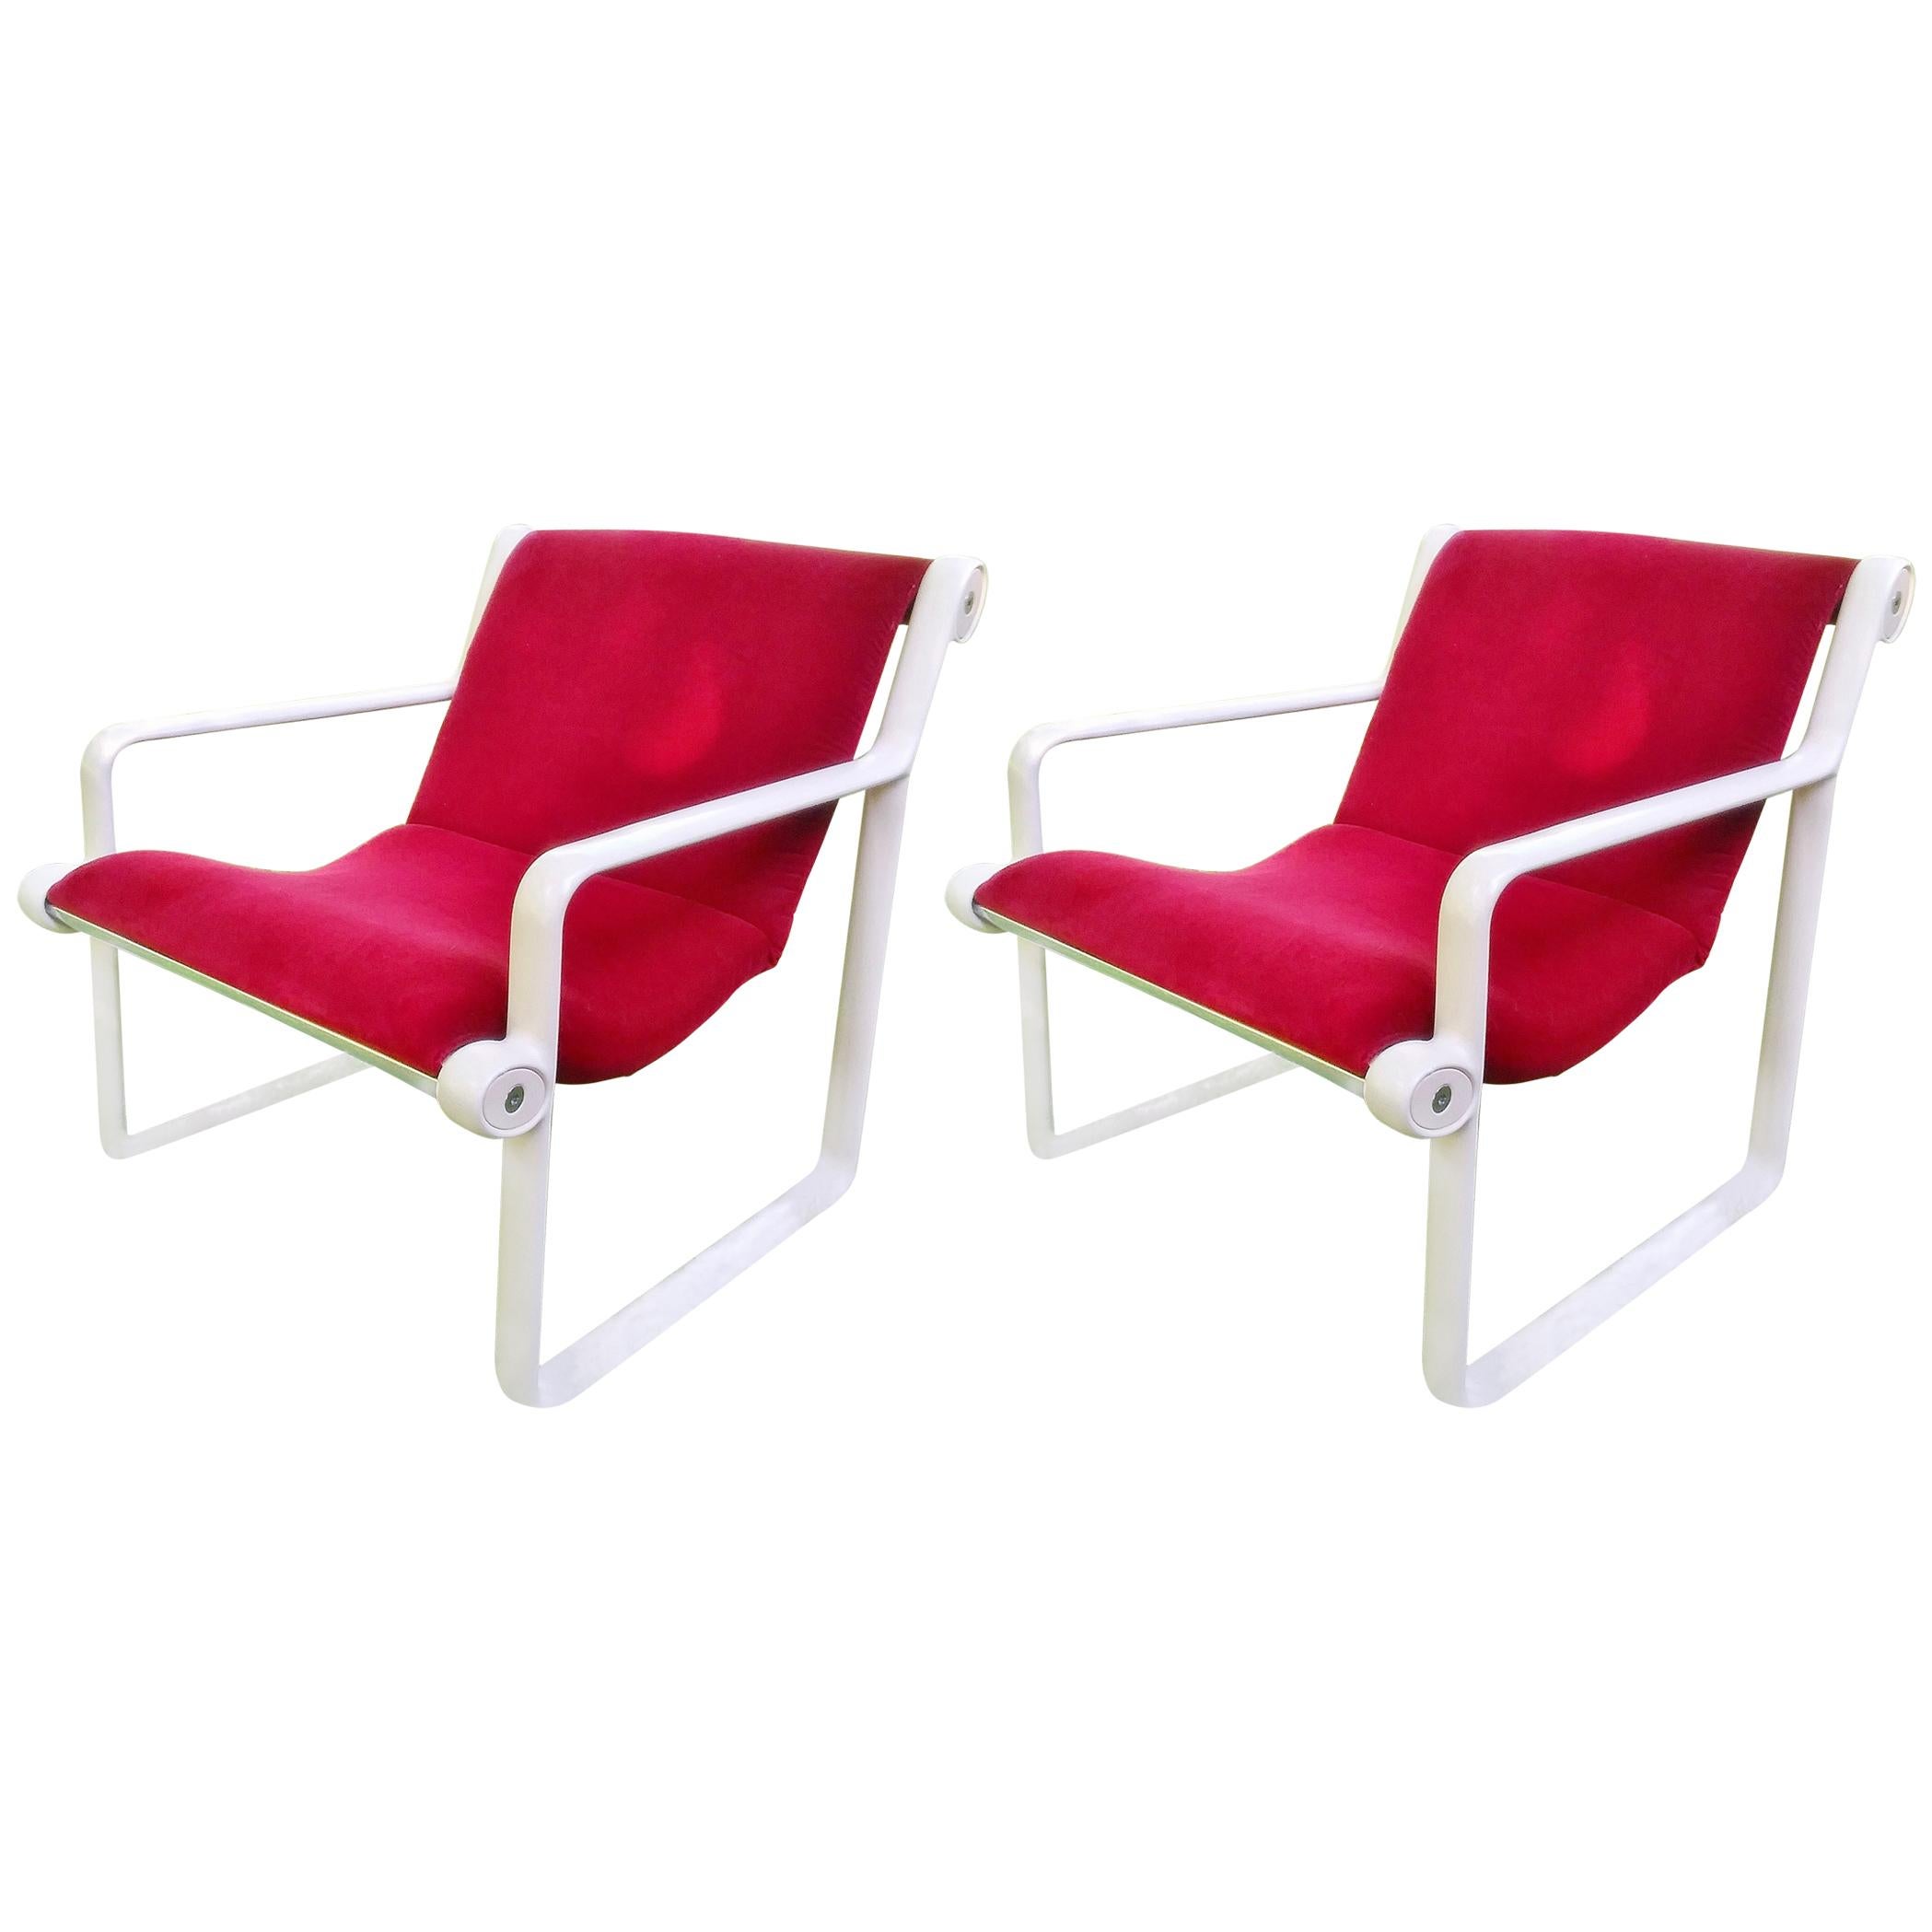 Pair of Mid Century Red Velvet Lounge Chairs by Hannah and Morrison, Knoll, 1972